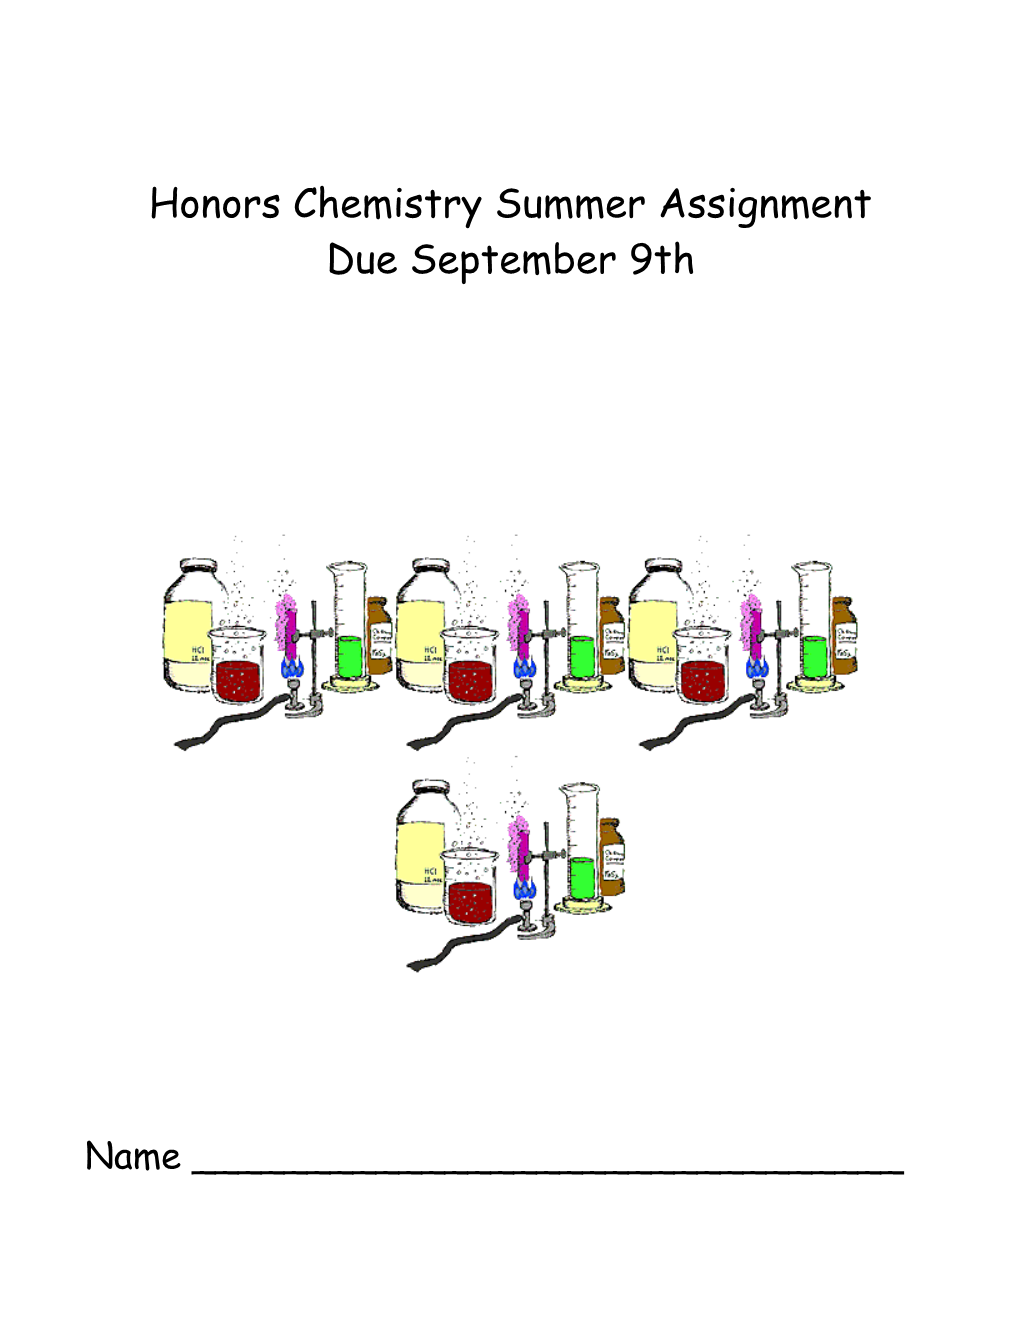 Honors Chemistry Summer Assignment